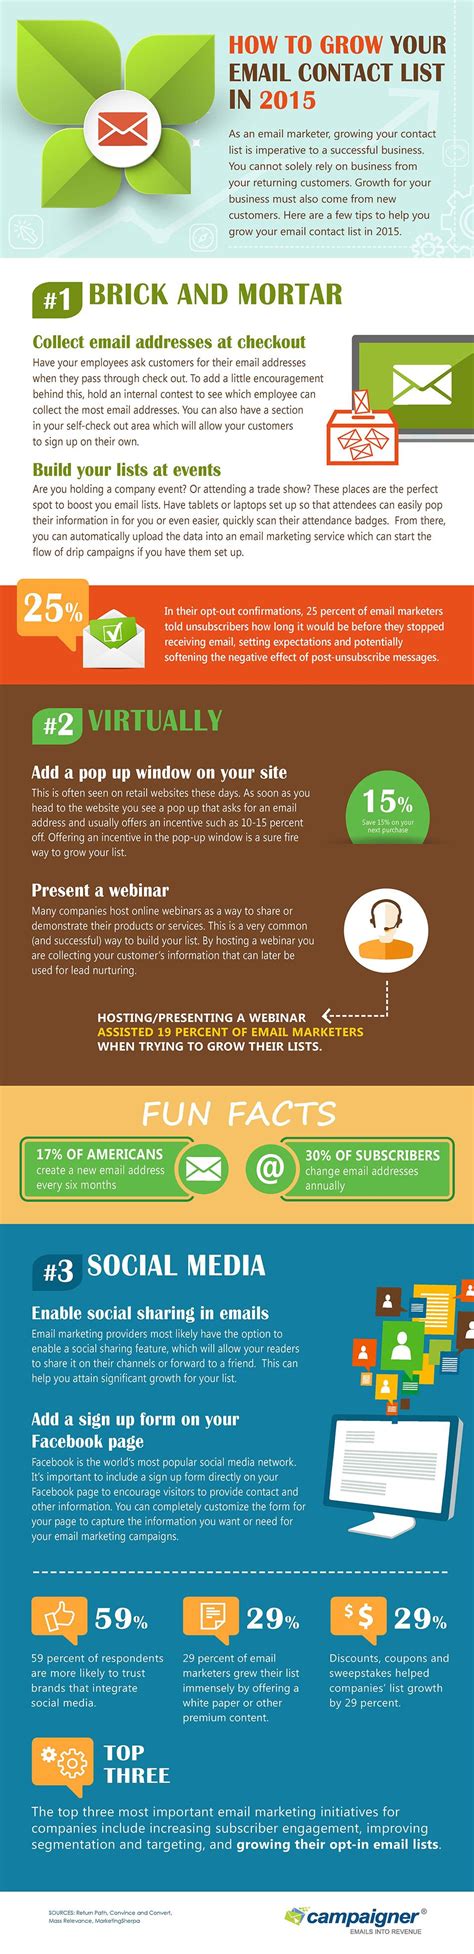 grow  email contact list   infographic visualistan